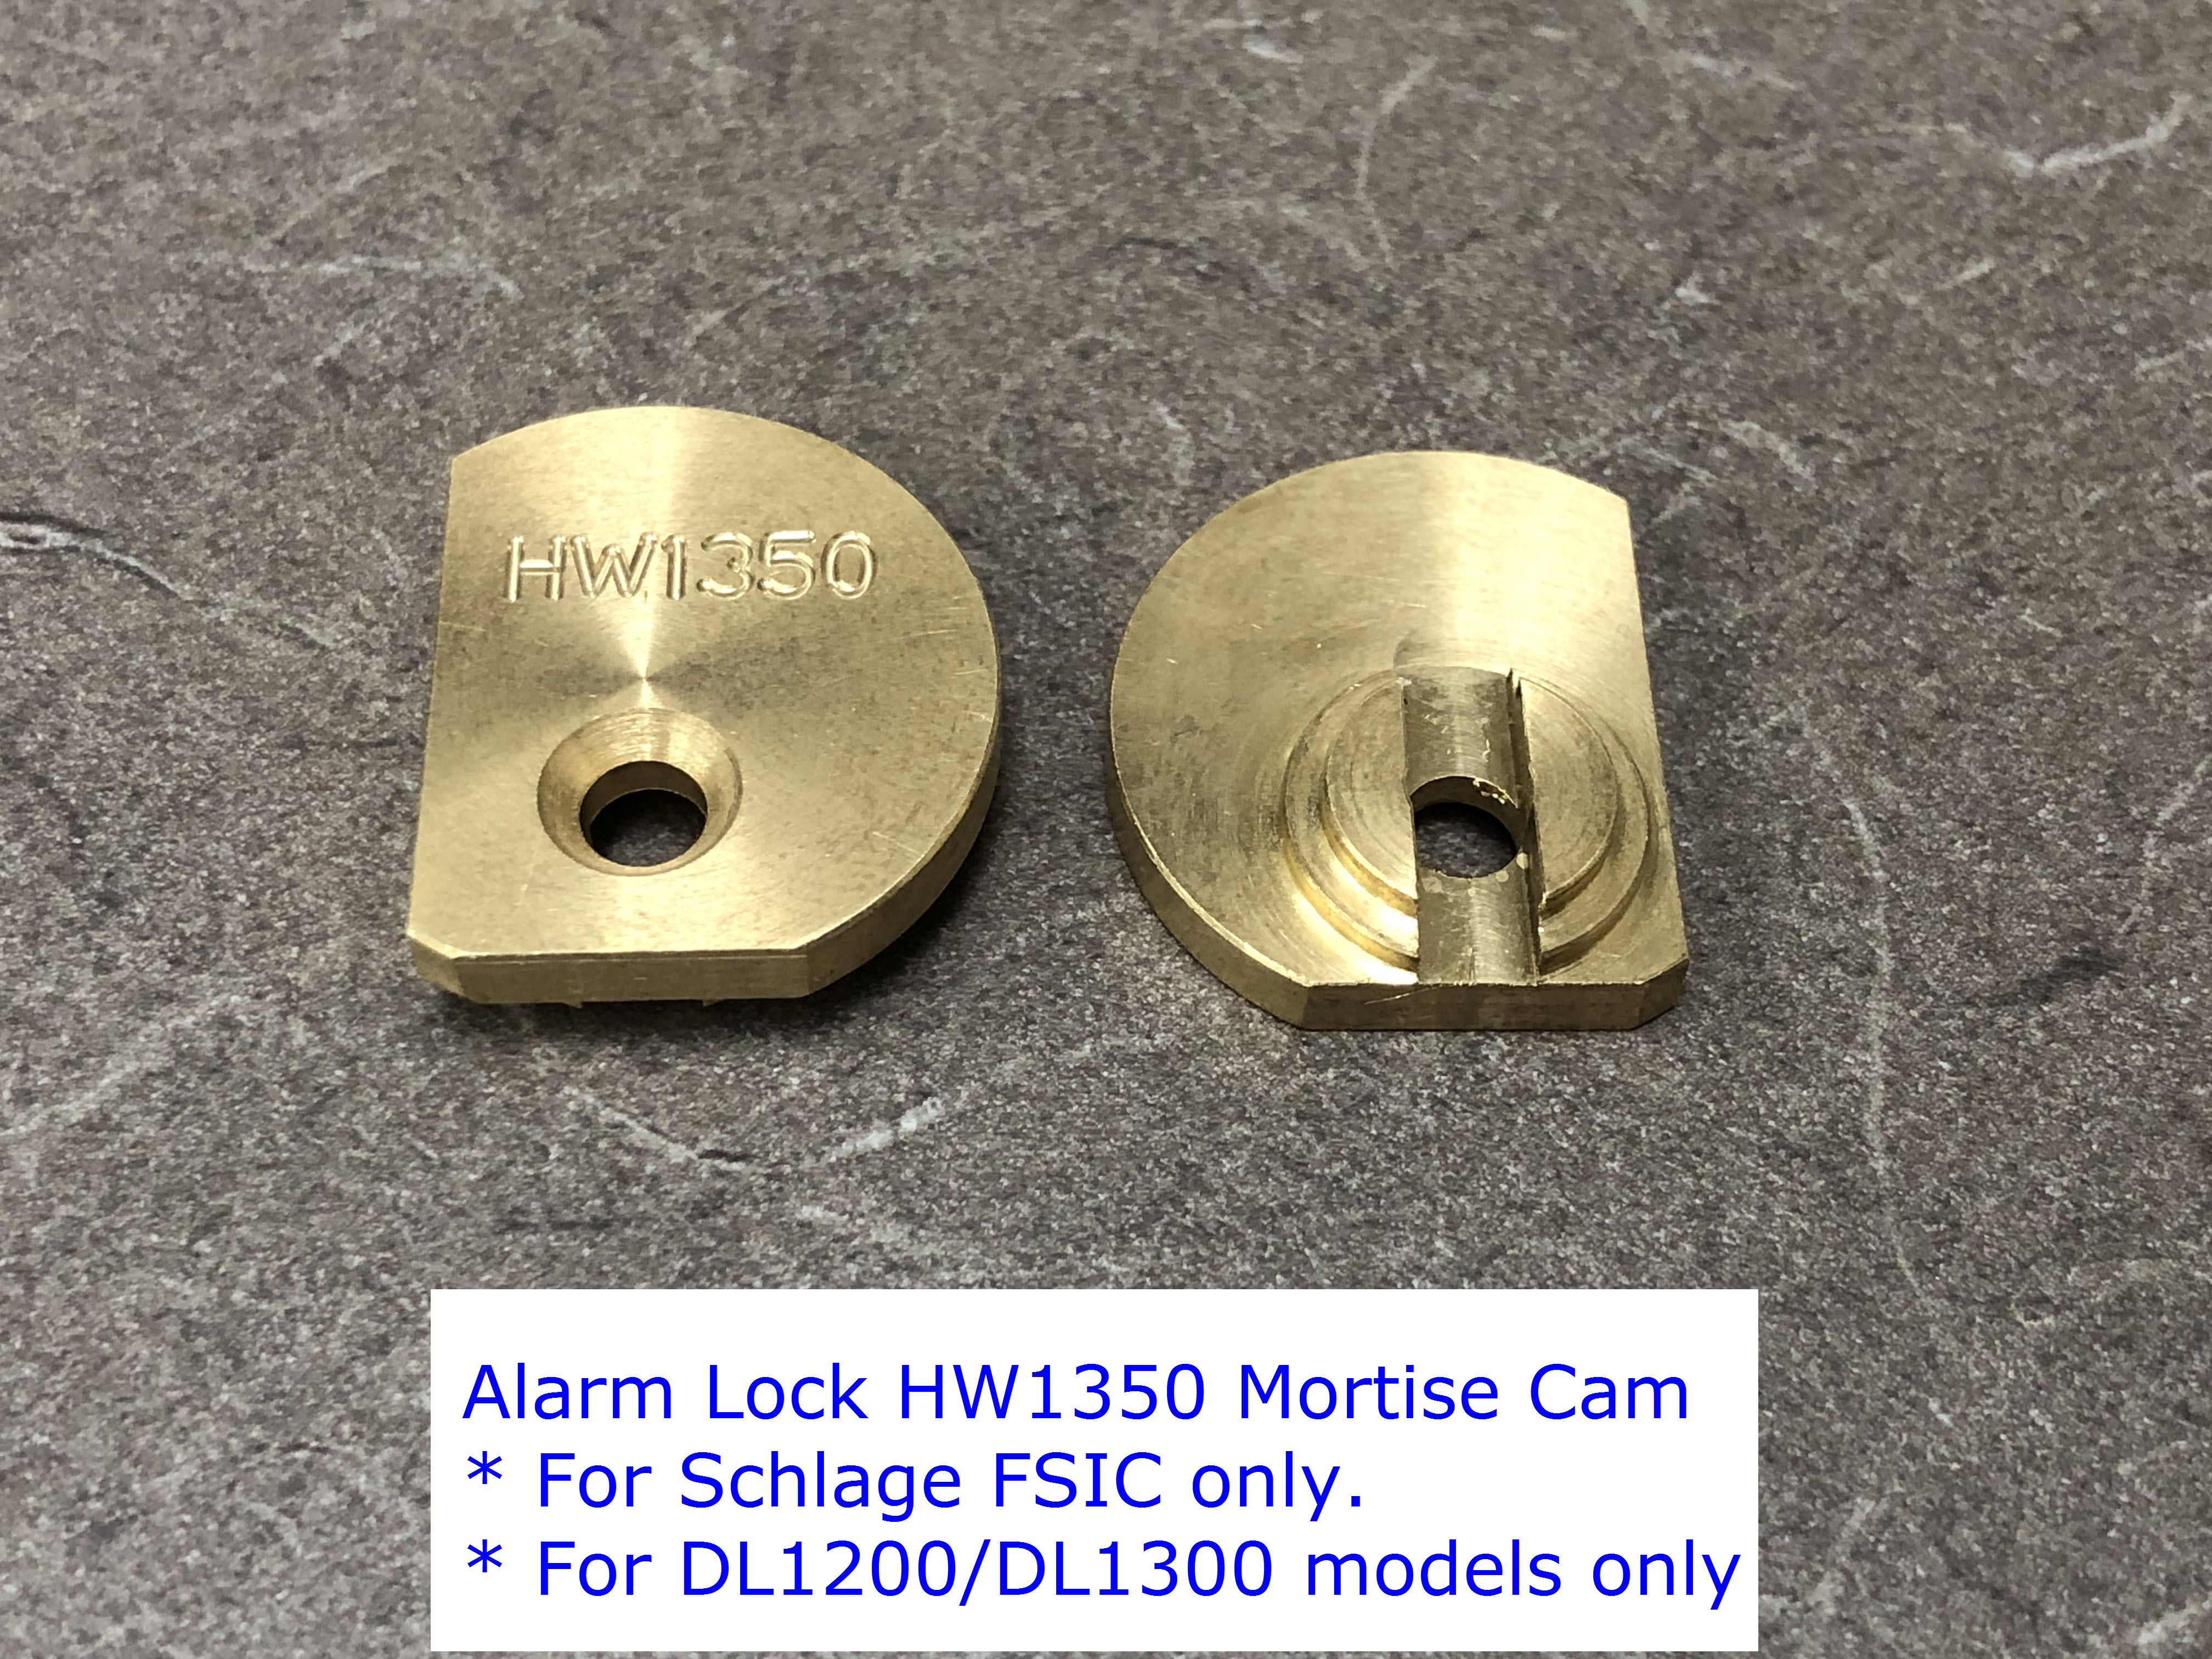 Alarm Lock DL1300 mortise cyl. cams HW1350 for Schlage FSIC only